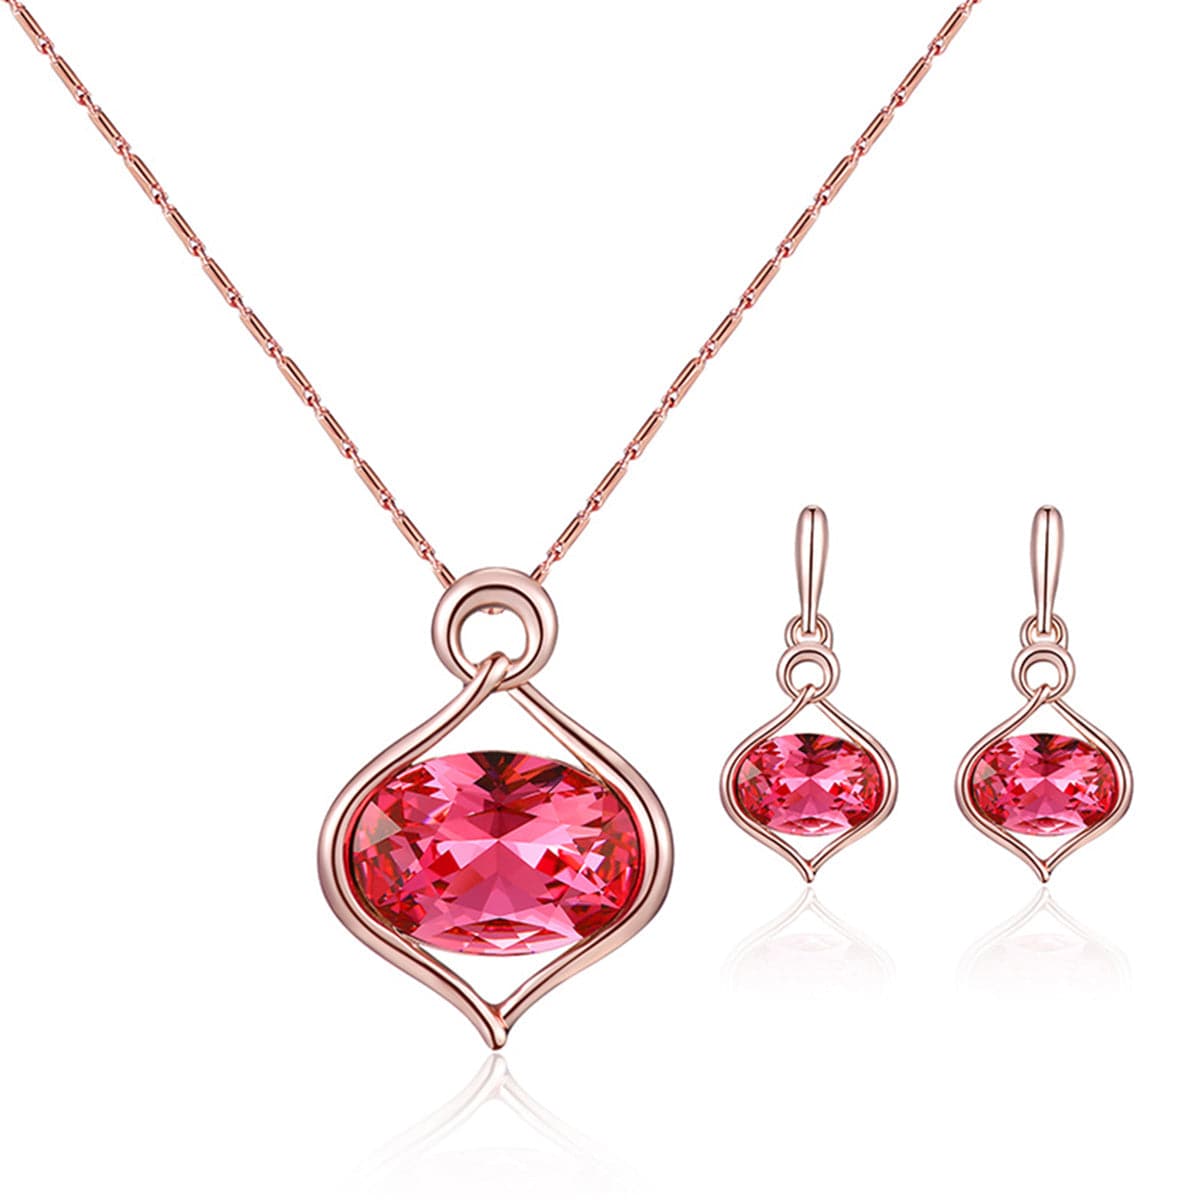 Red Crystal & 18K Gold Plated Pendant Necklace & Stud Earrings Set